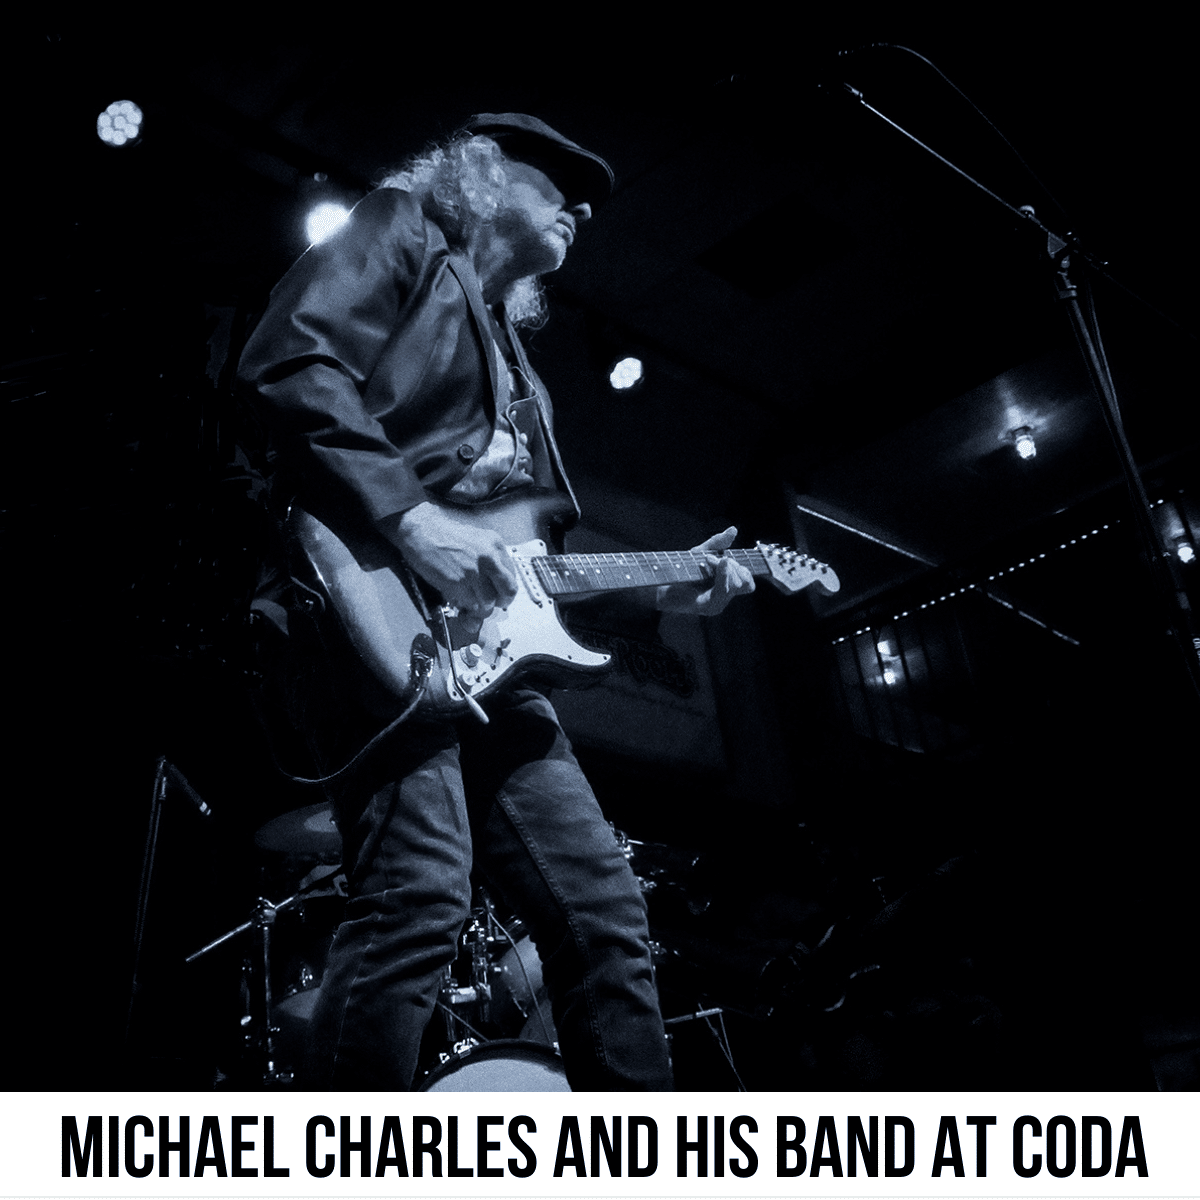 square image with a black and white photo of Michael Charles playing his guitar on stage. A white strip across the bottom has the text Michael Charles and His Band at CODA